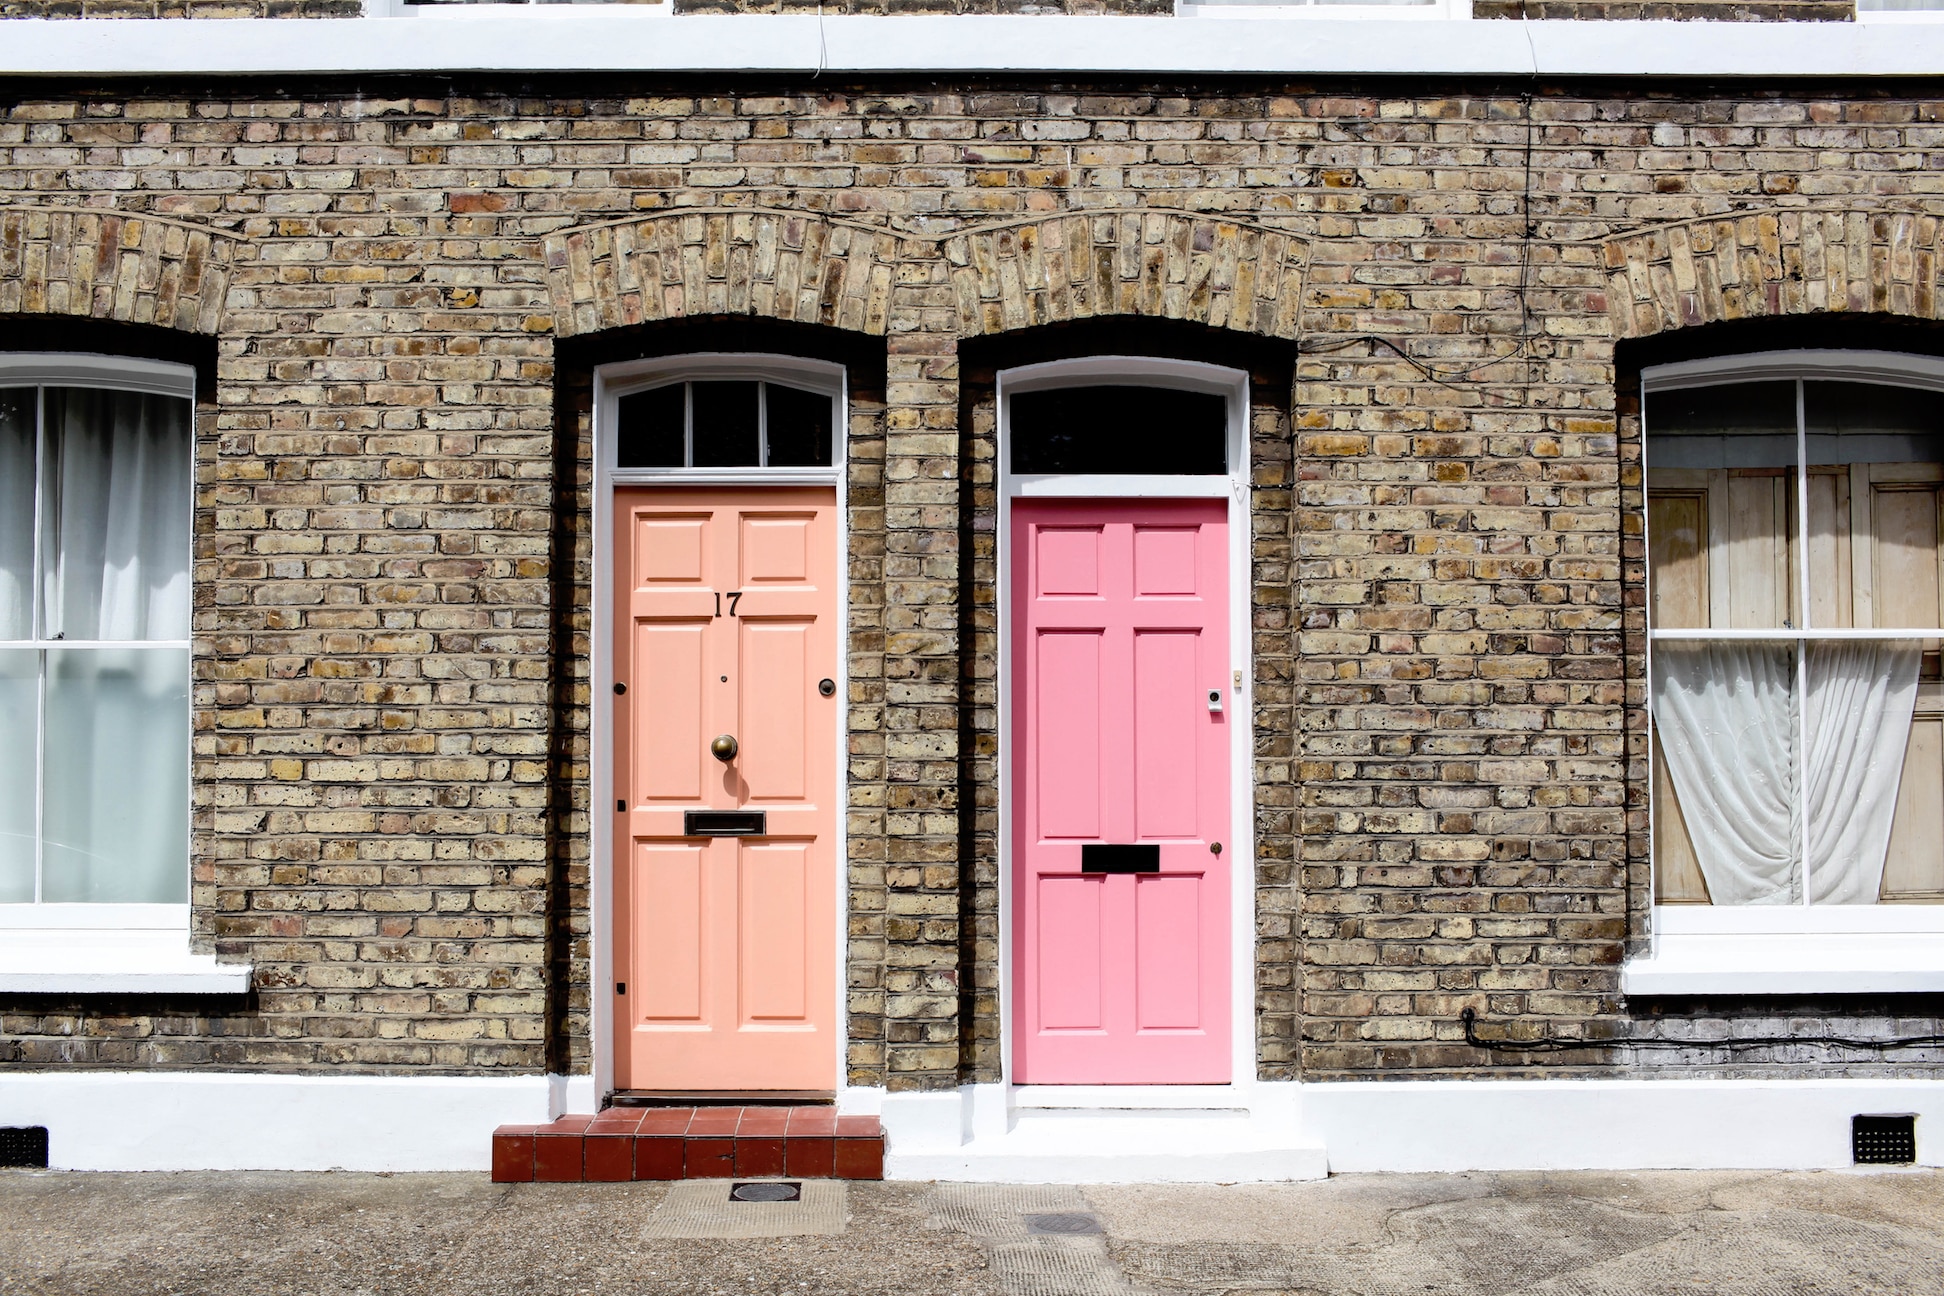 Negative Equity Risk Increased for London First-time Buyers